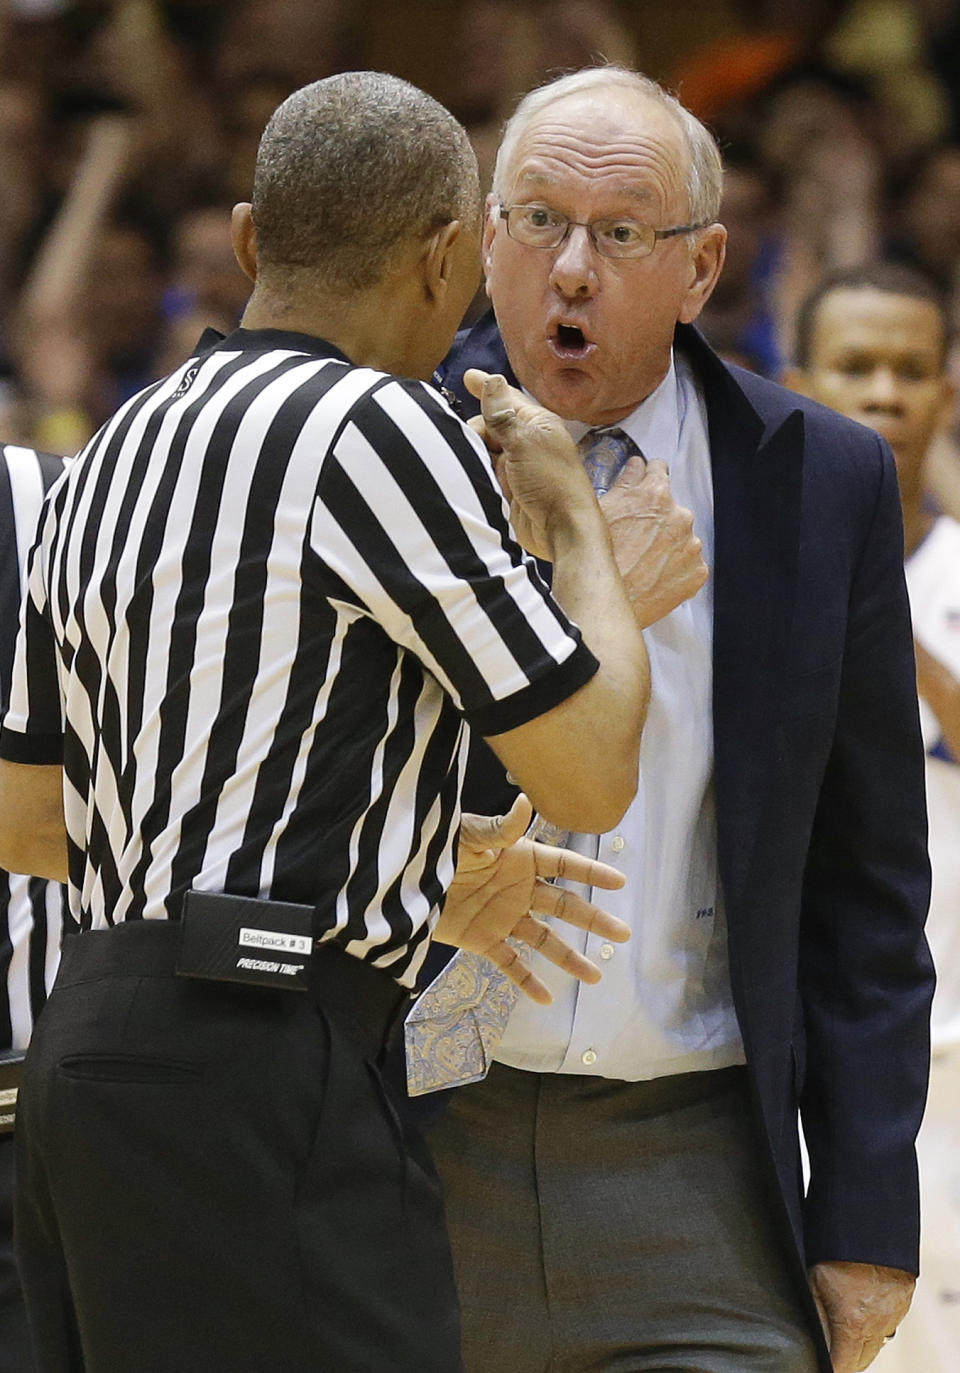 Syracuse coach Jim Boeheim argues with an official before receiving a technical foul during the second half of an NCAA college basketball game against Duke in Durham, N.C., Saturday, Feb. 22, 2014. Duke won 66-60. (AP Photo/Gerry Broome)